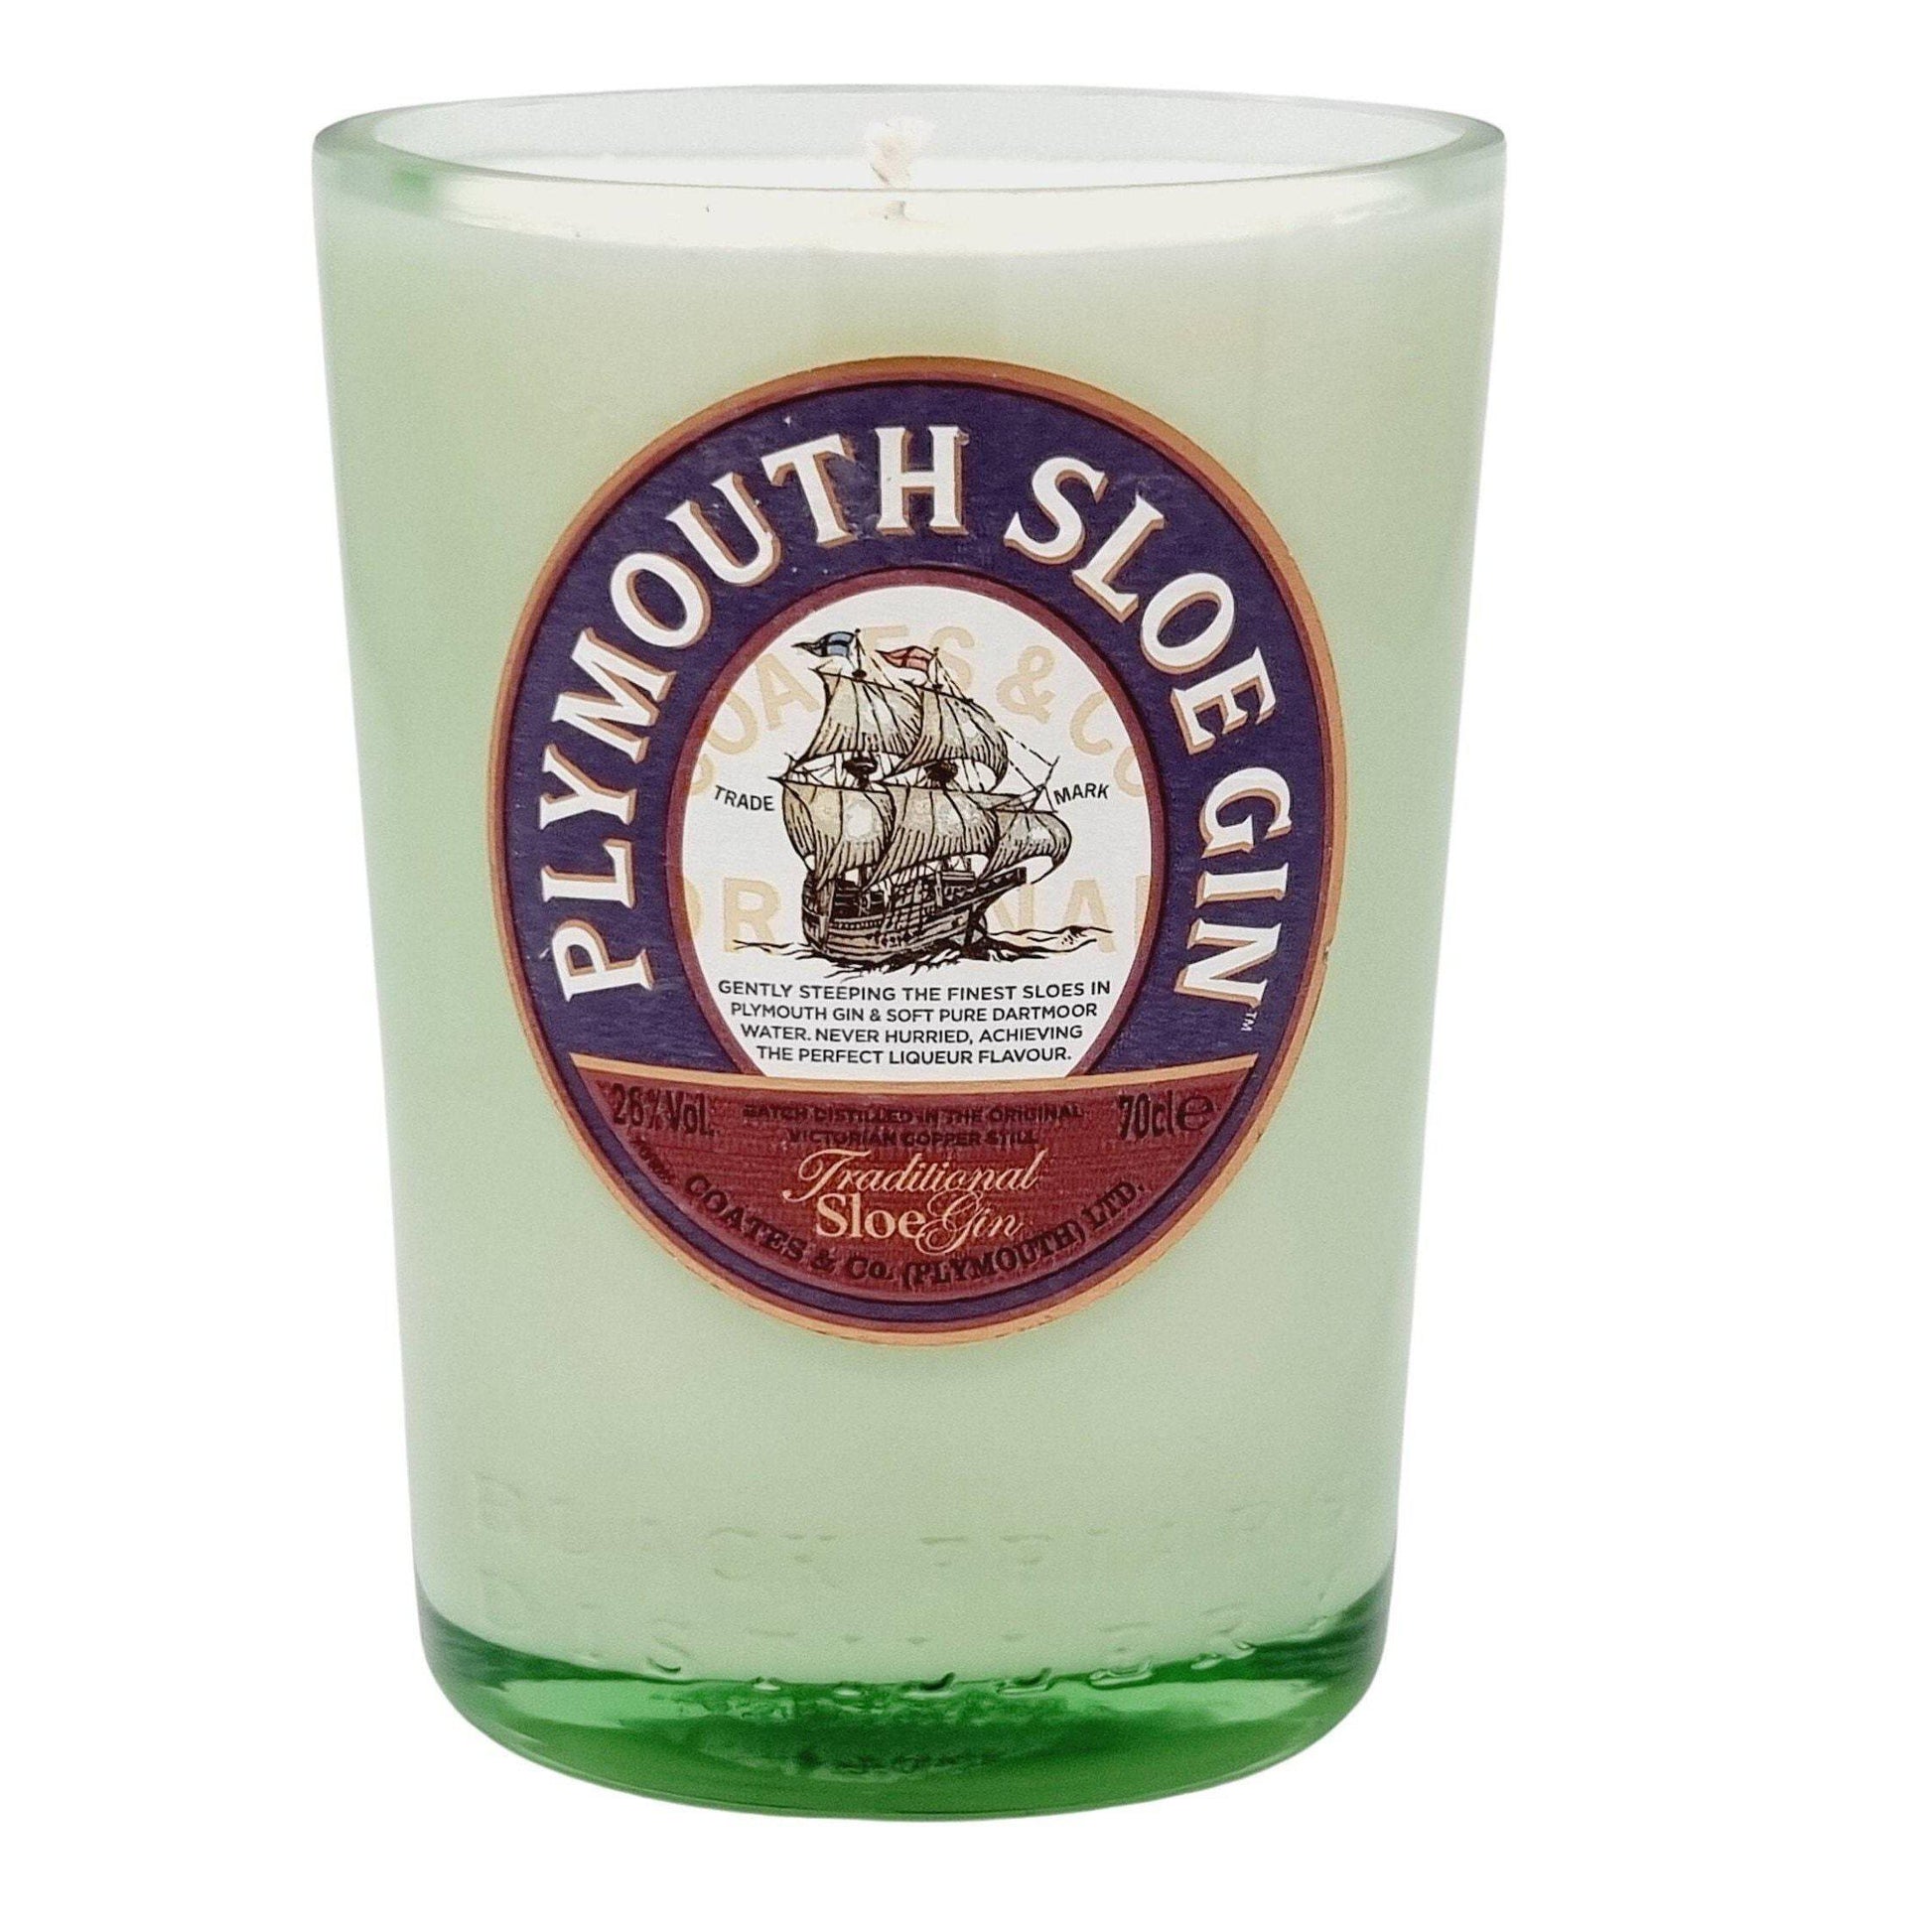 Plymouth Sloe Gin Bottle Candle Gin Bottle Candles Adhock Homeware